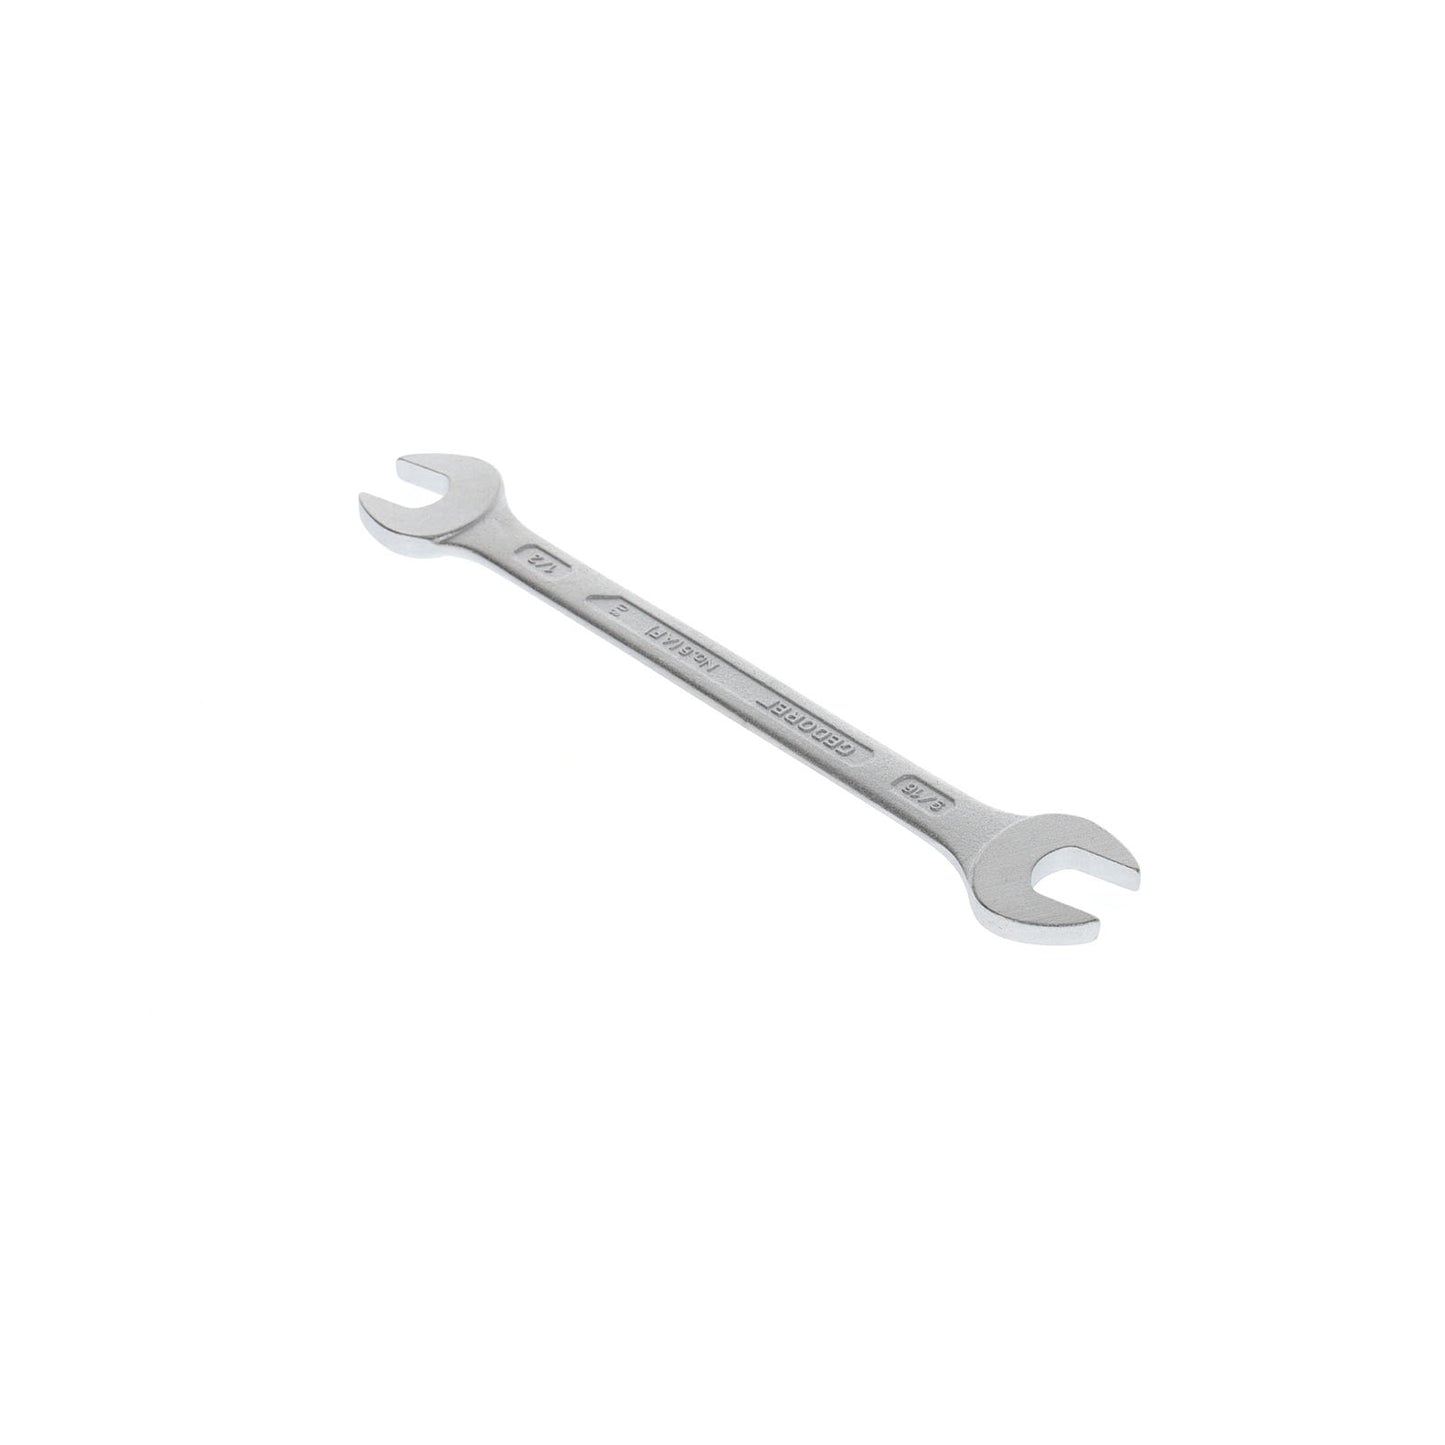 GEDORE 6 1/2X9/16AF - 2-Mount Fixed Wrench, 1/2x9/16AF (6070450)